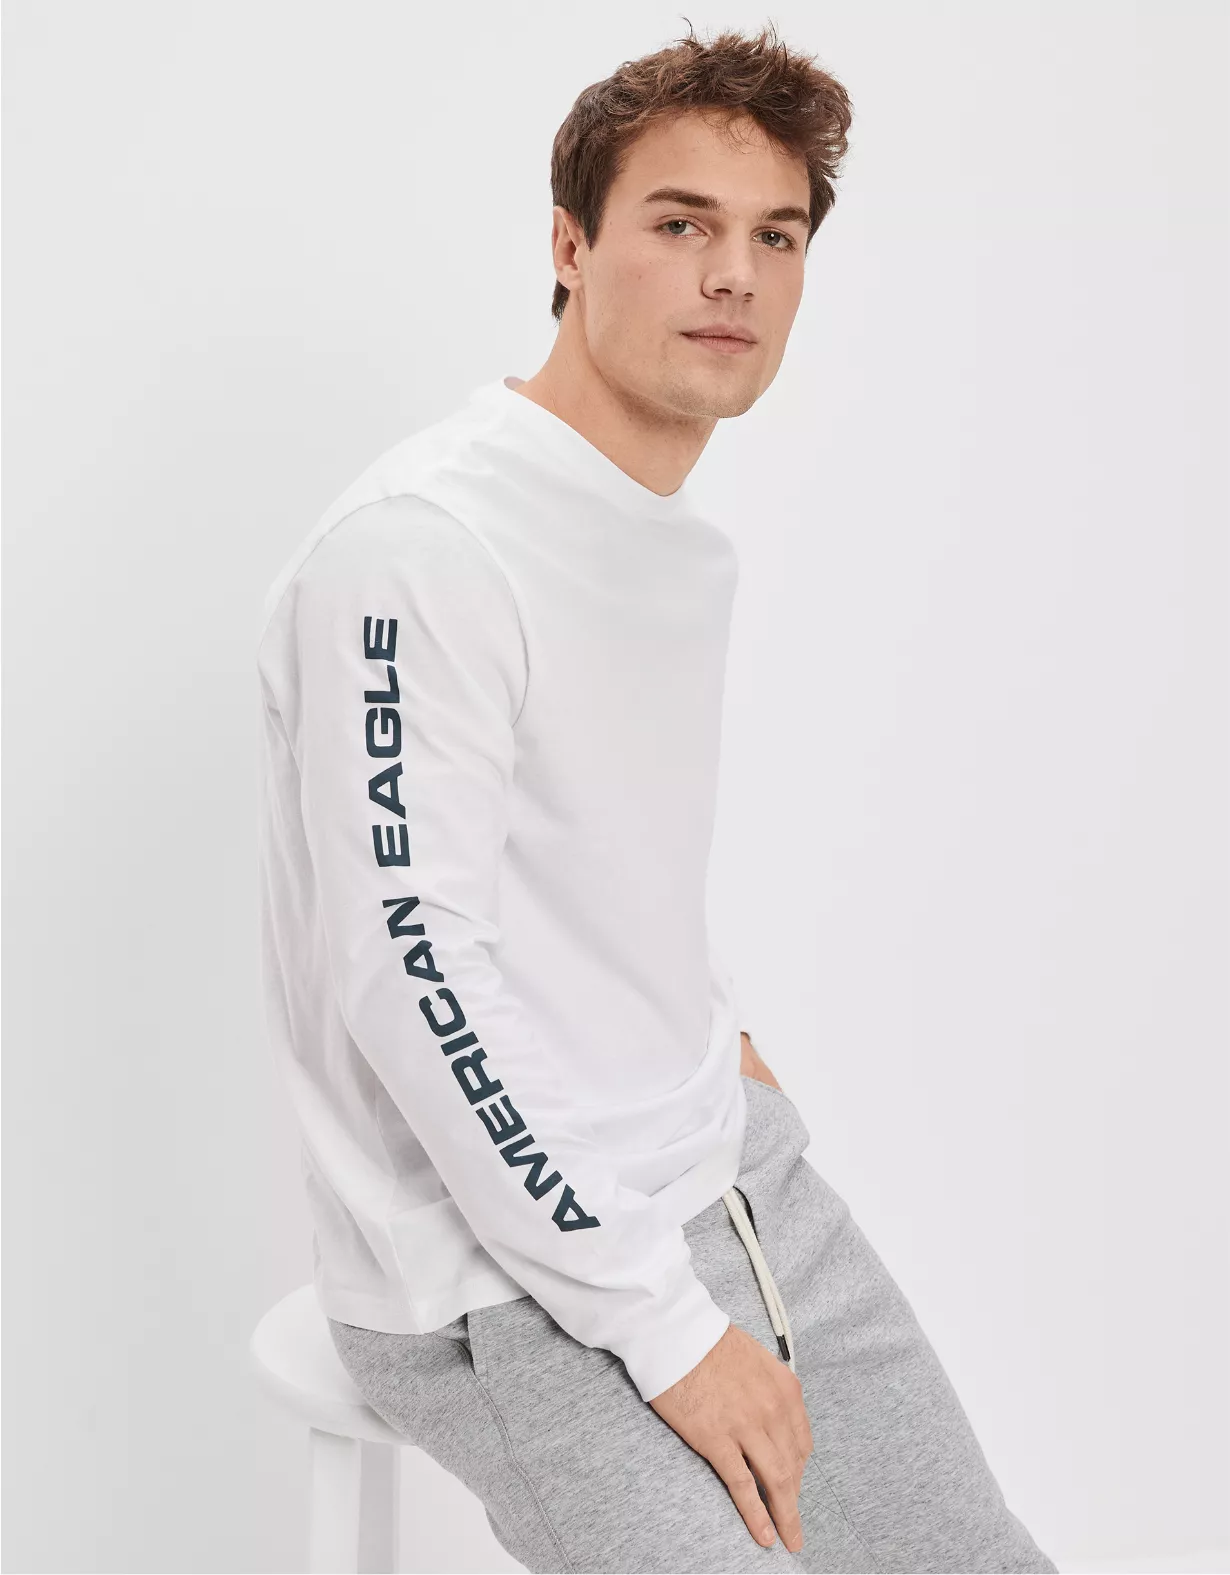 AE 24/7 Good Vibes Long-Sleeve Graphic T-Shirt